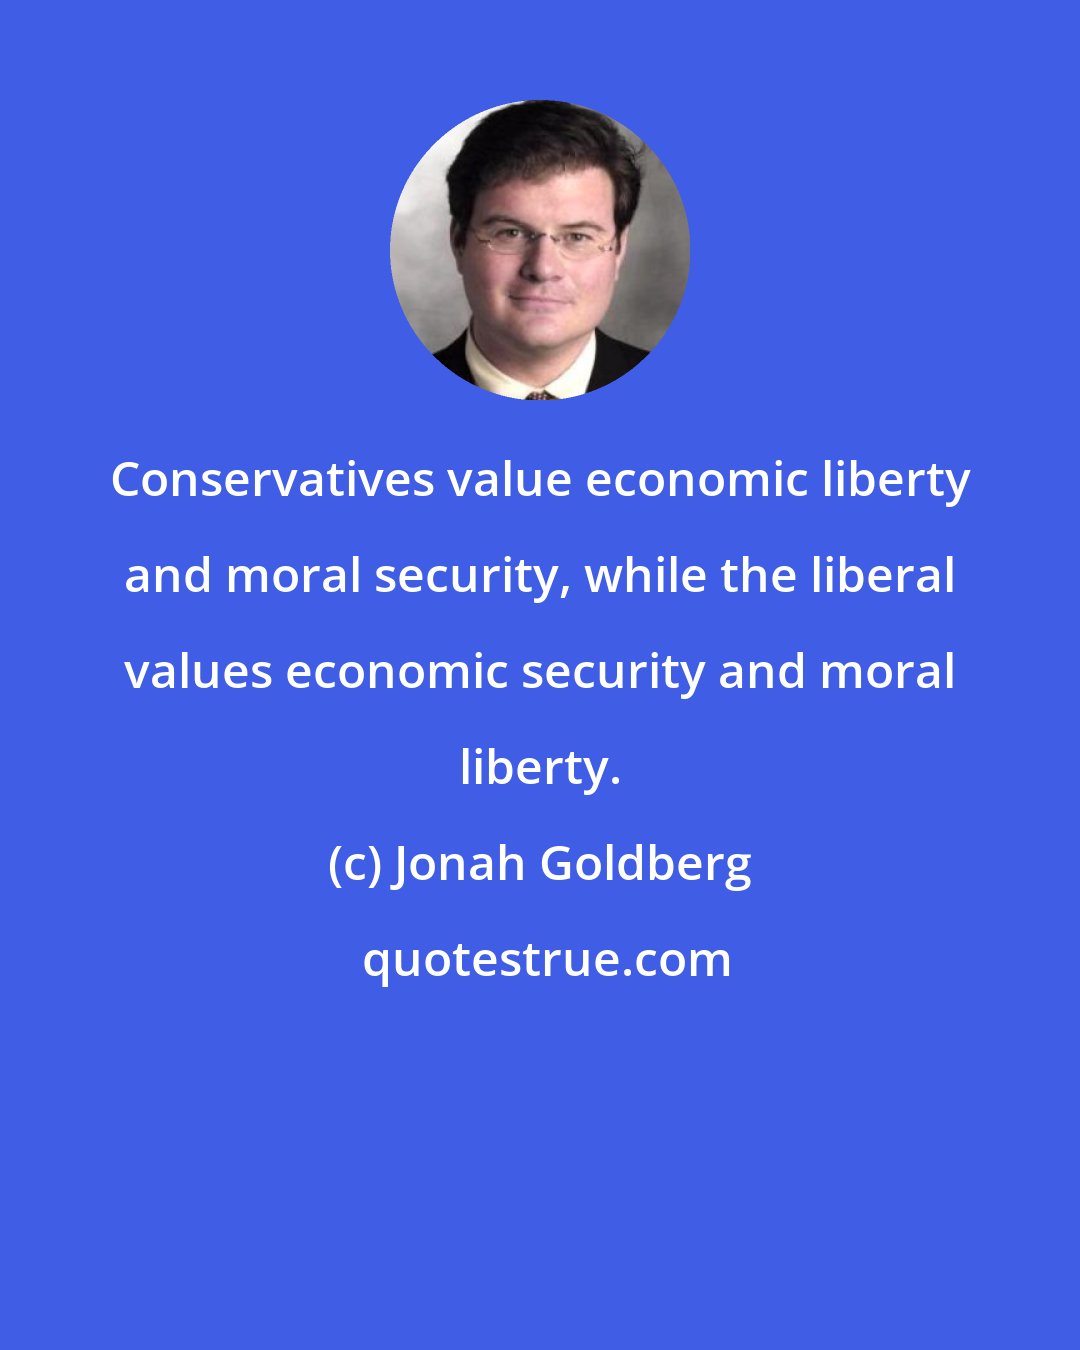 Jonah Goldberg: Conservatives value economic liberty and moral security, while the liberal values economic security and moral liberty.